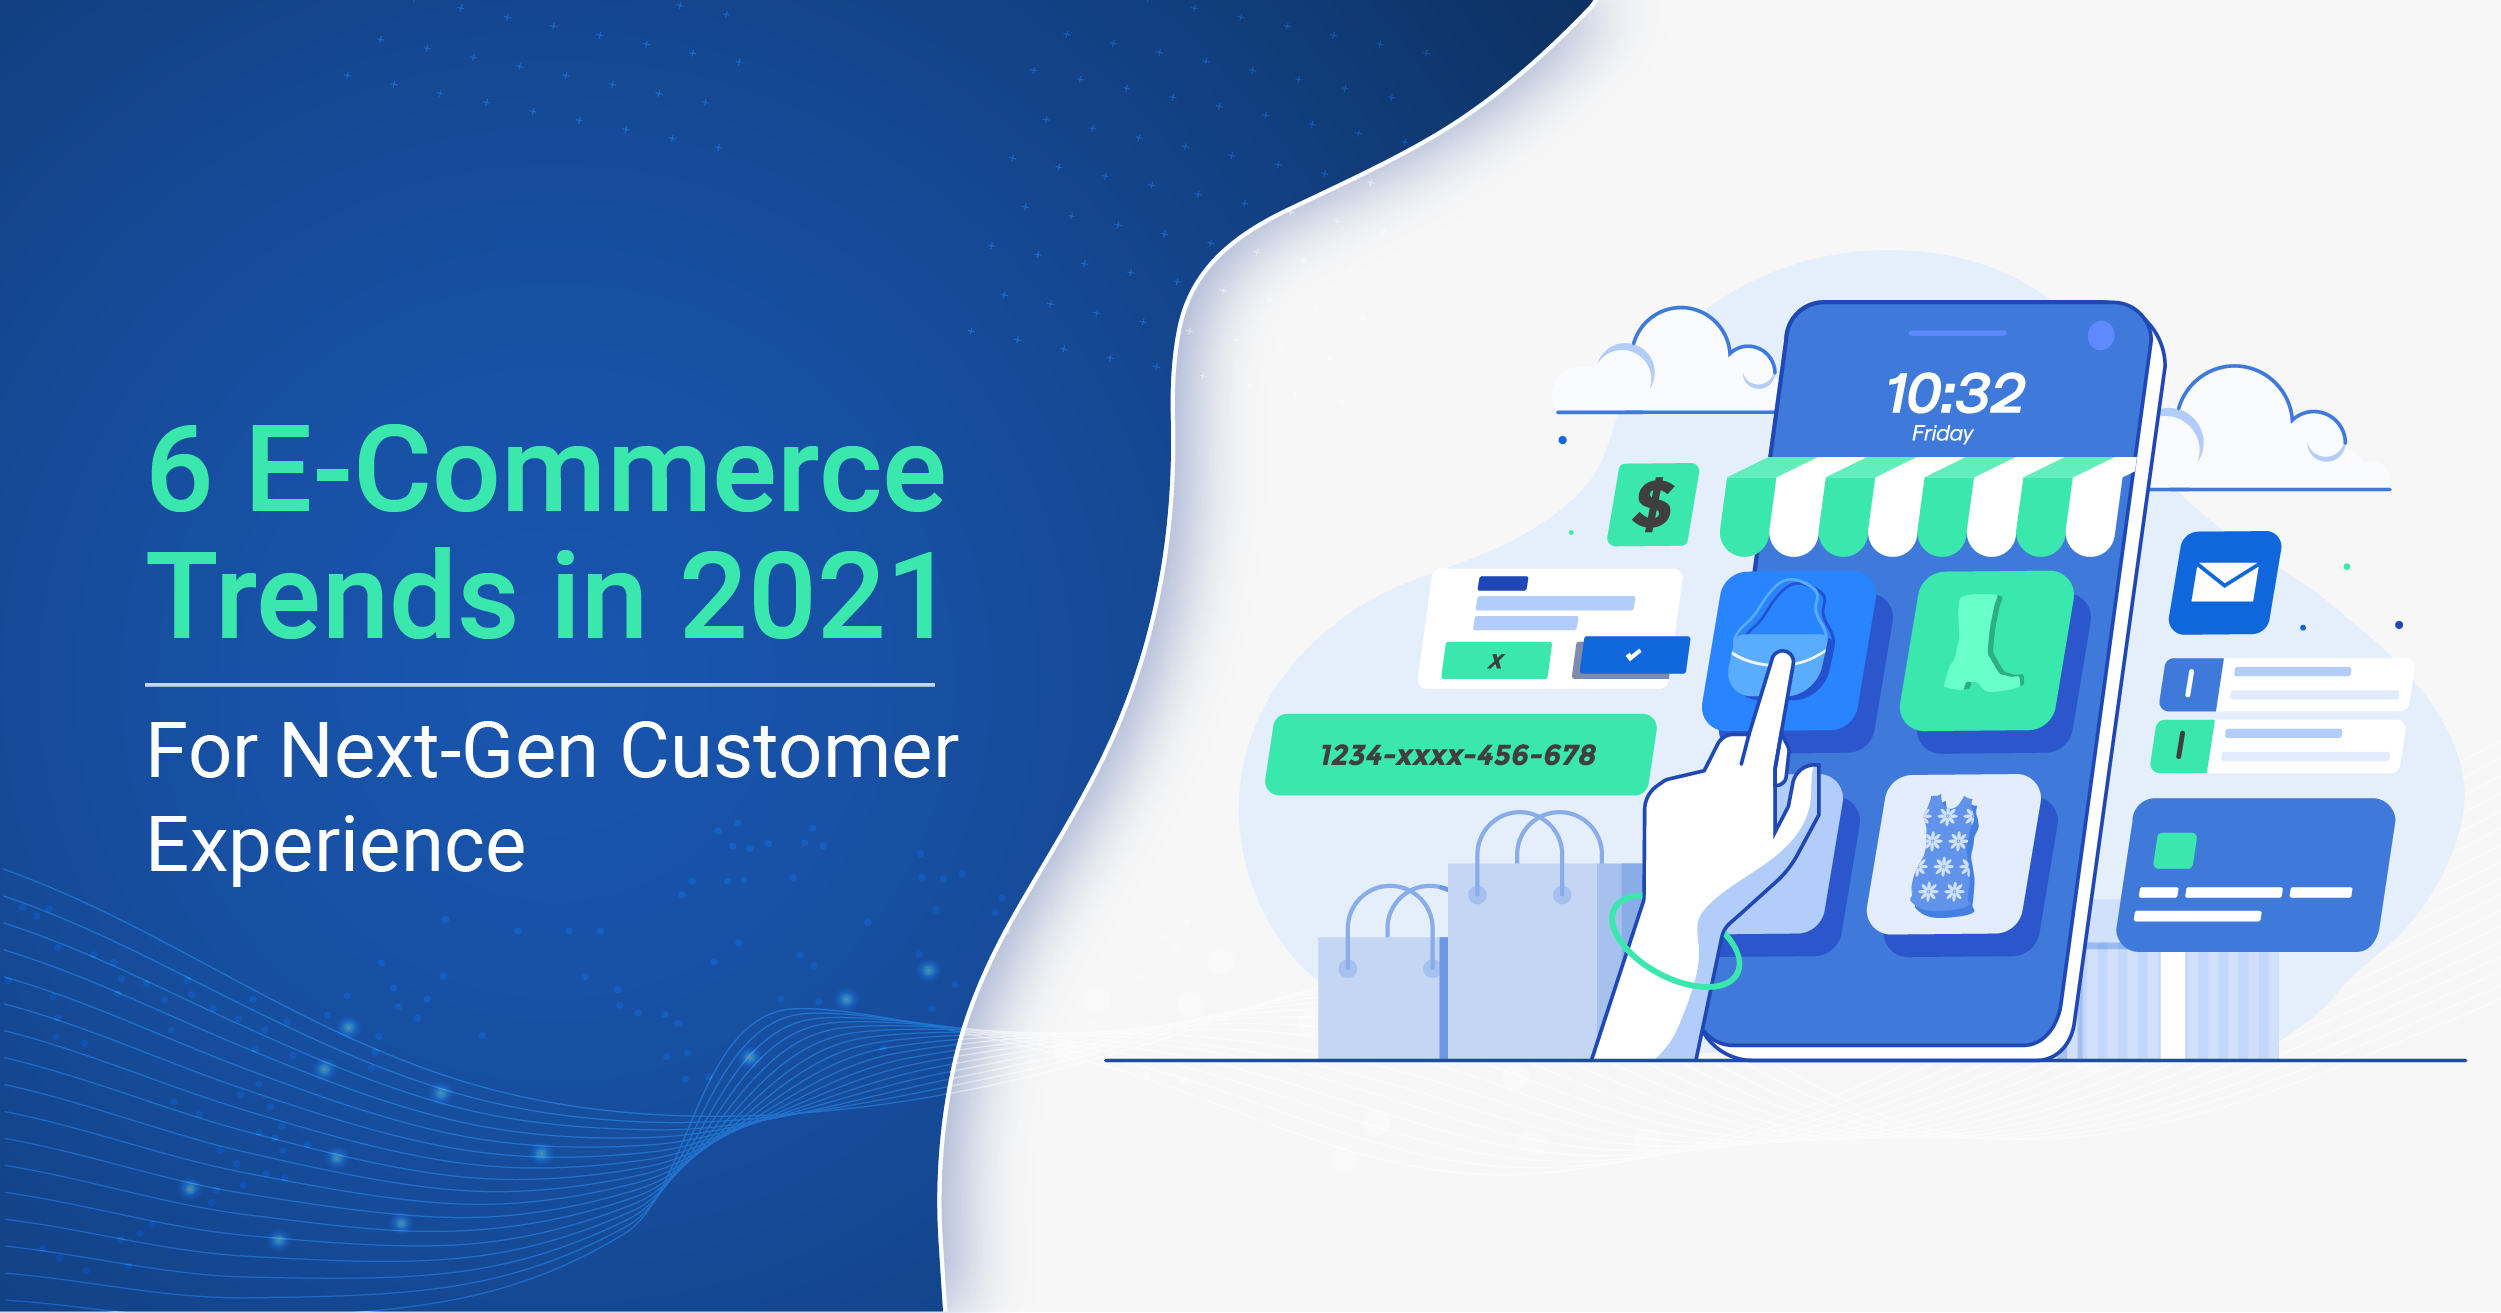 6 E-Commerce Trends in 2021 for Next-Gen Customer Experience